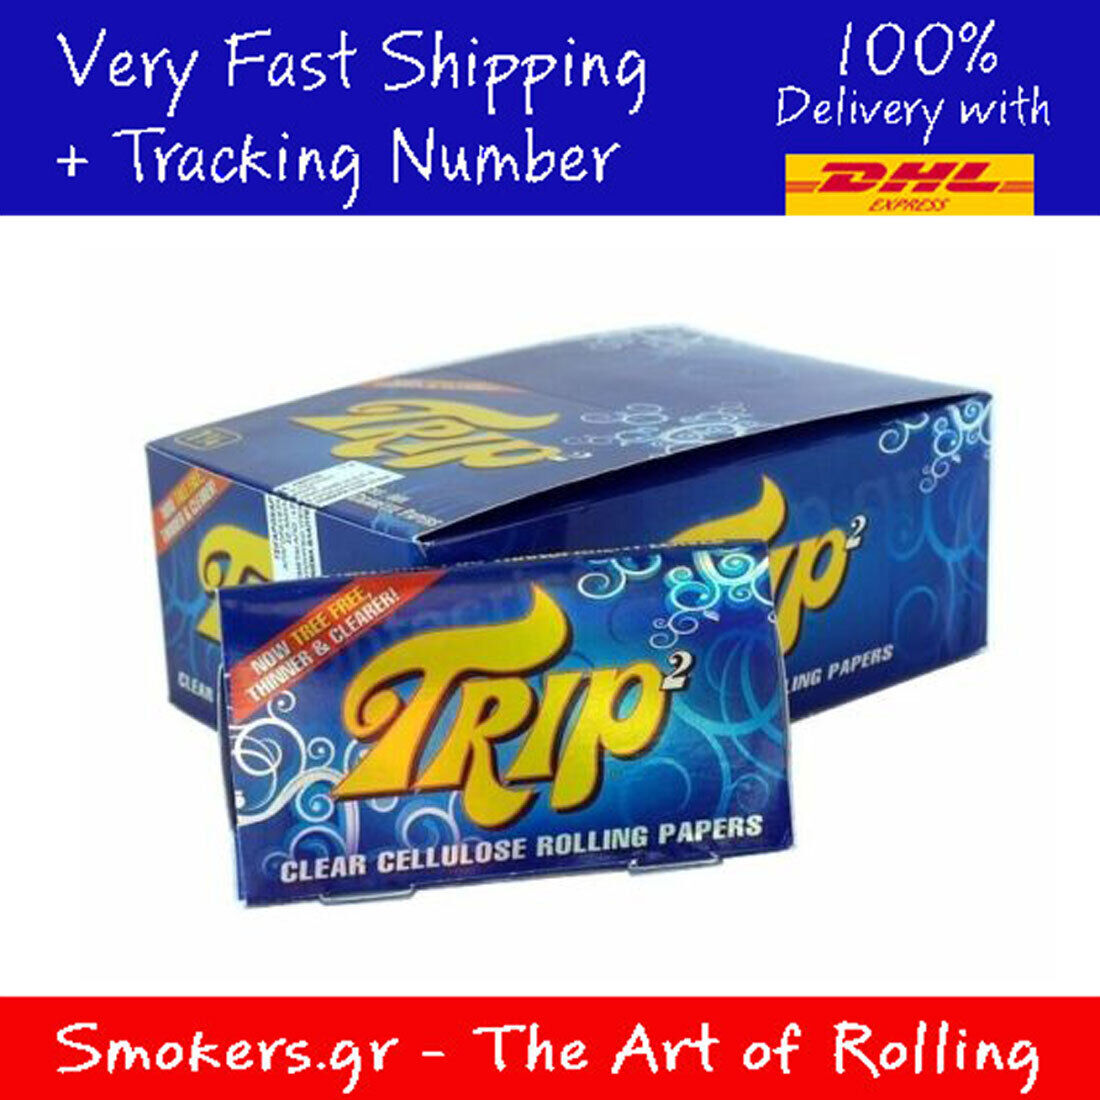 1x Box Trip2 1 1/4 Clear Cellulose Transparent Cigarette Rolling Papers